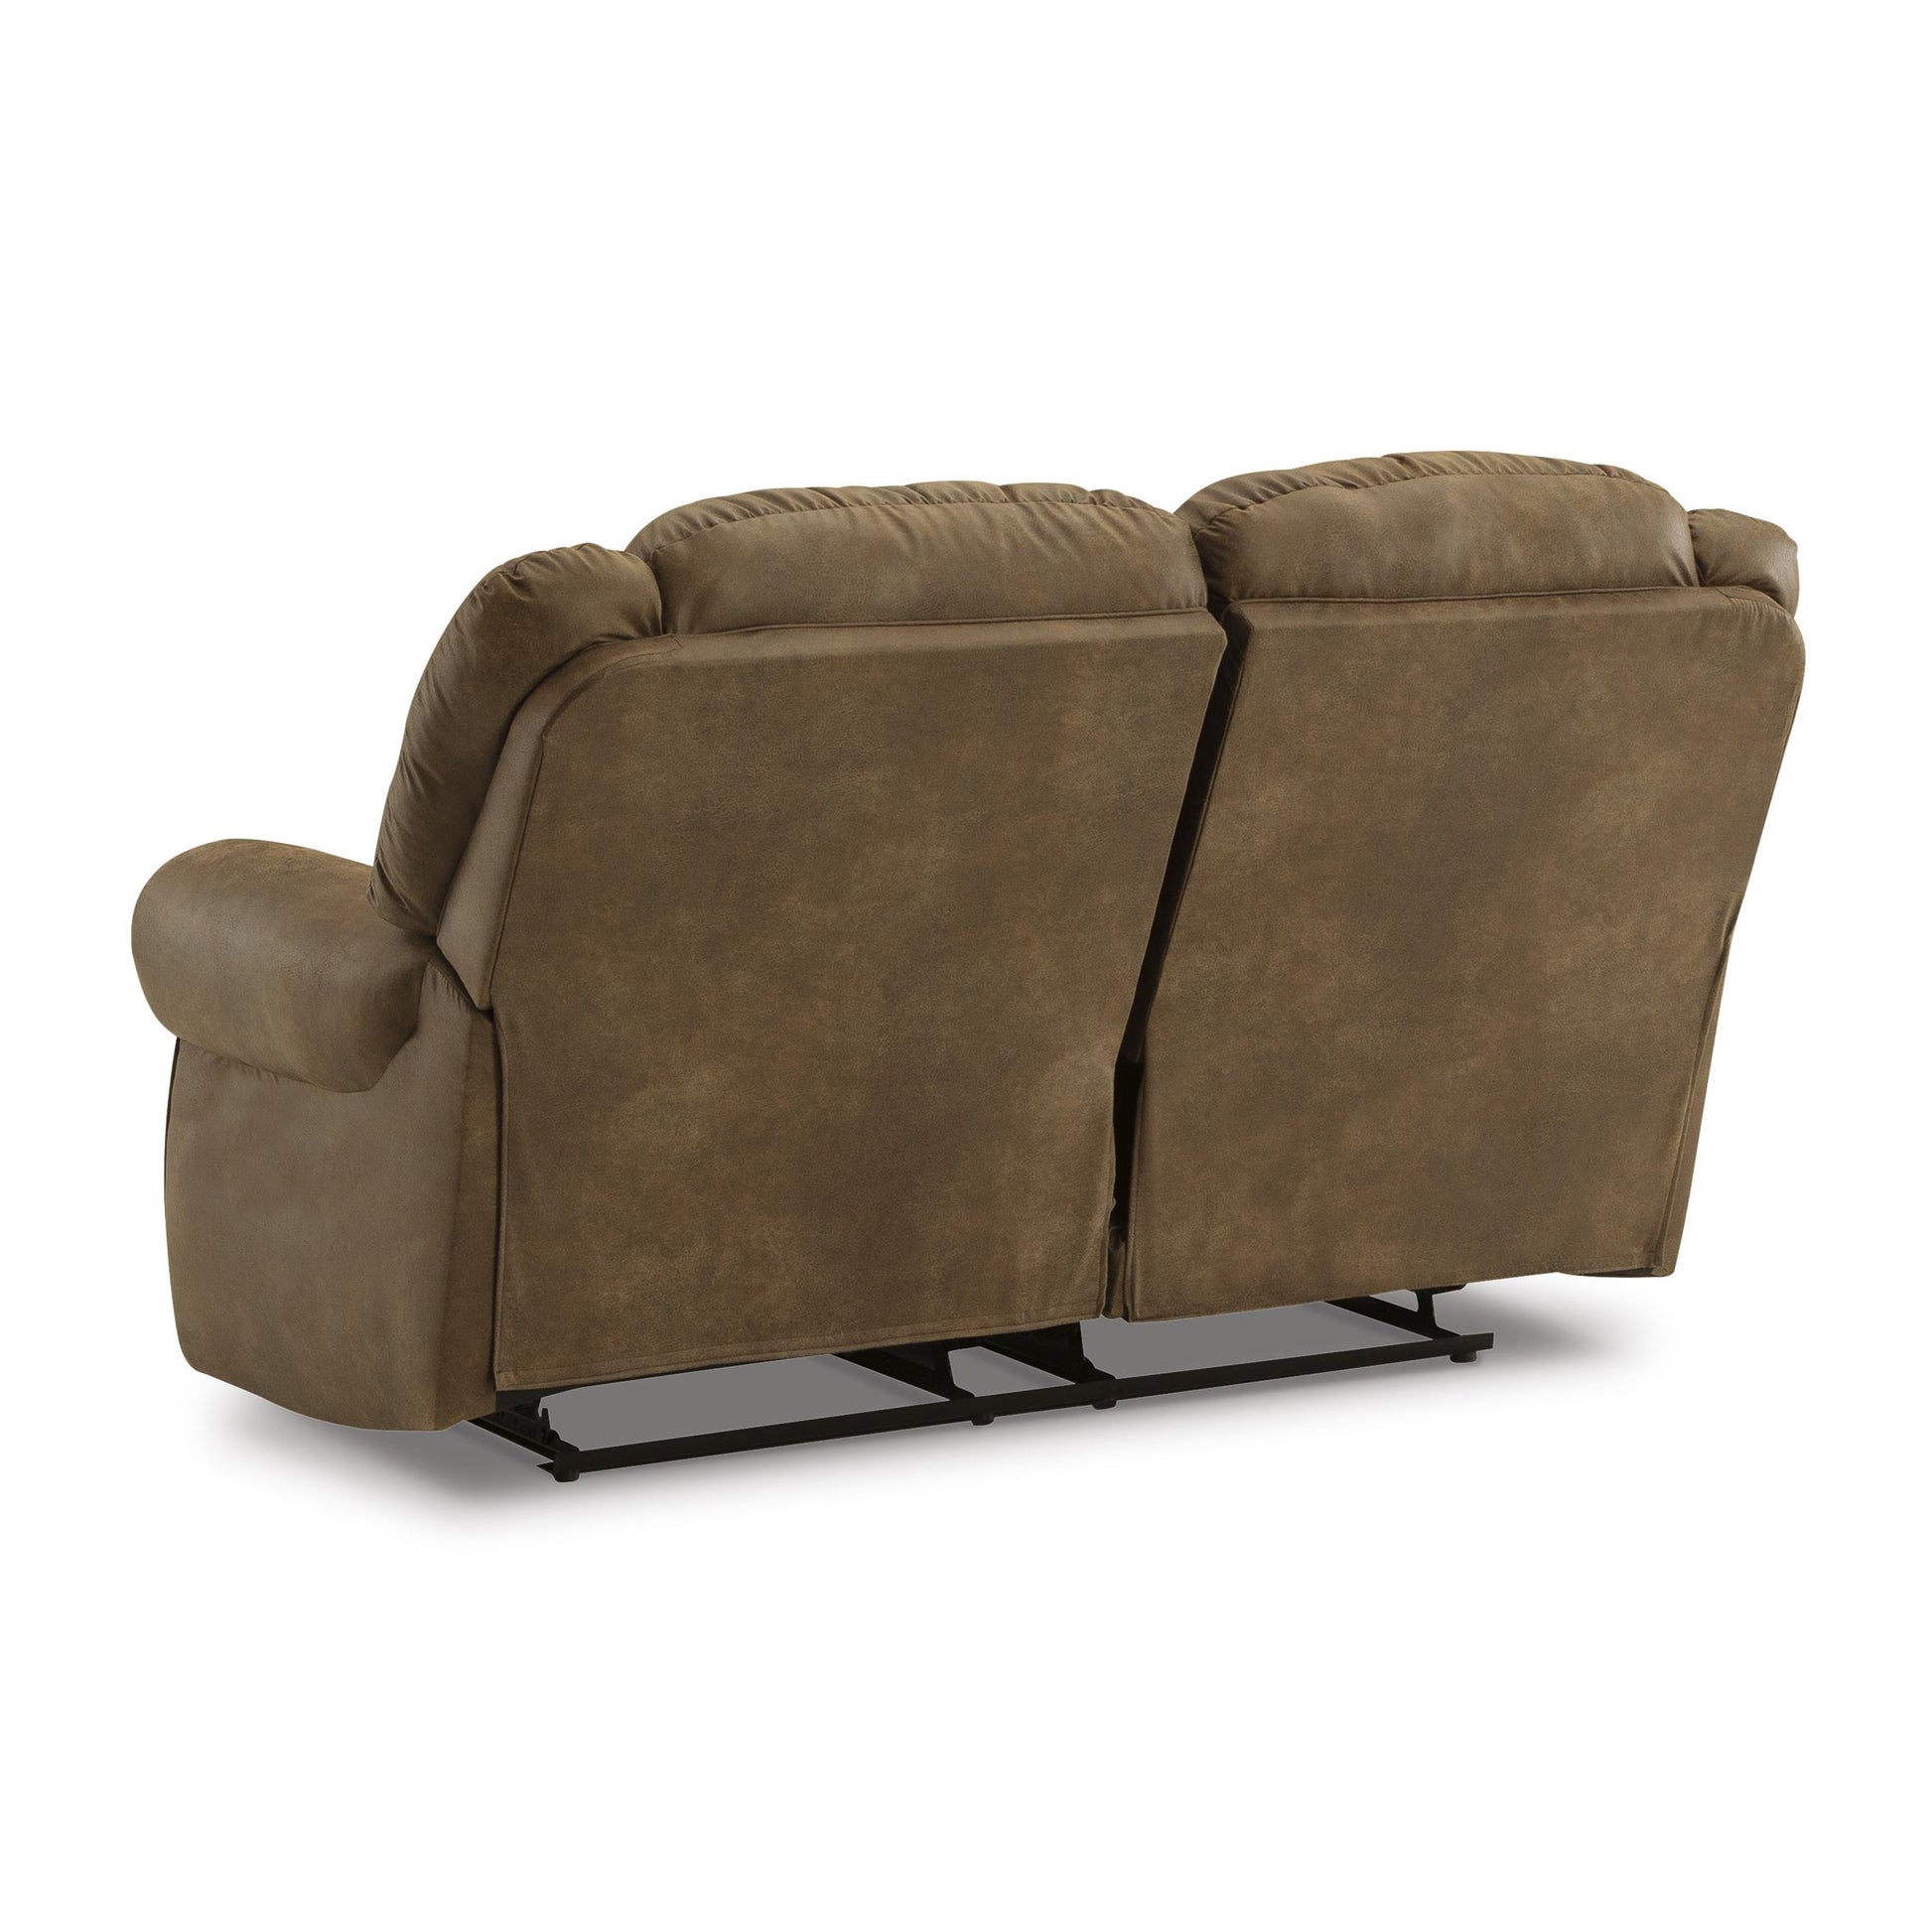 Signature Design by Ashley Boothbay Power Reclining Leather Look Loveseat 4470474 IMAGE 5